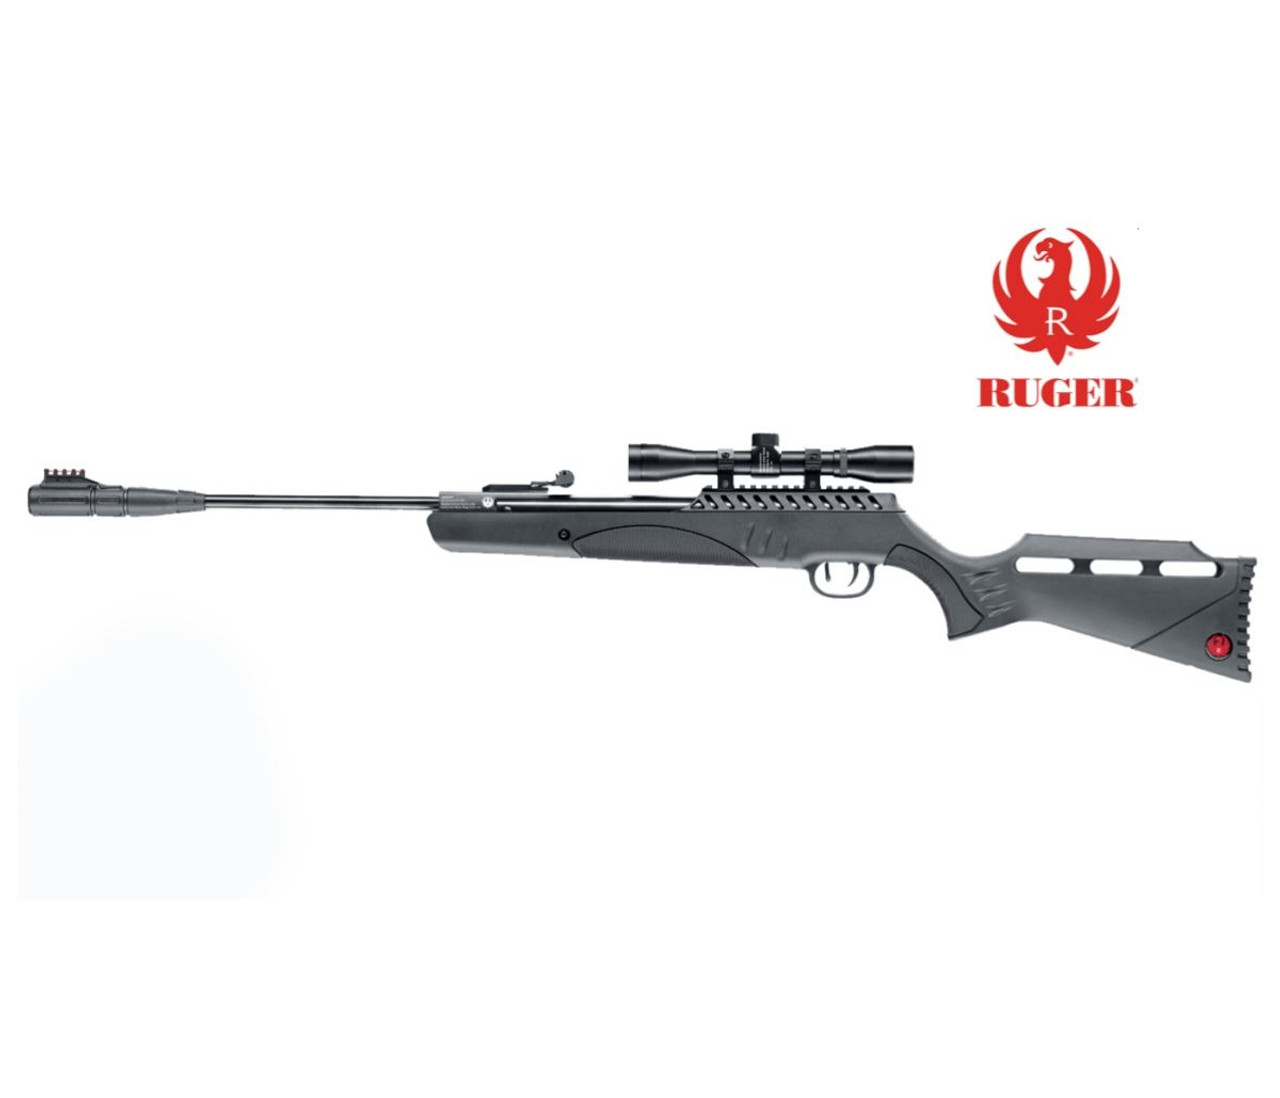 Ruger Targis Hunter .177 Air Rifle Kit by Umarex with Walther 3-9x32 Scope